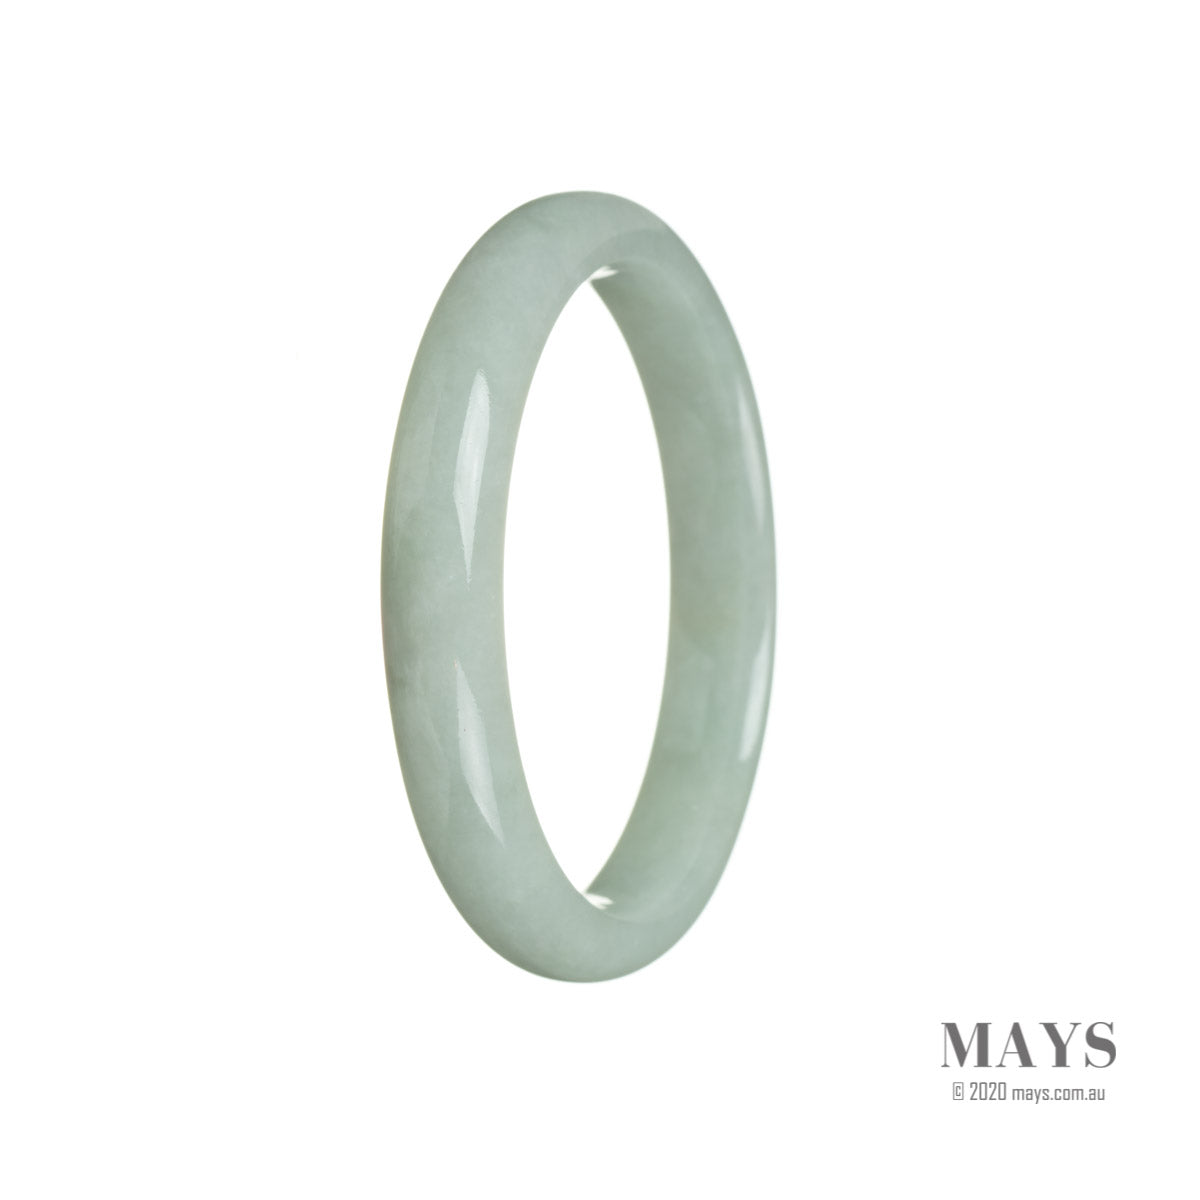 A light green jade bracelet with a semi-round shape, untreated and natural. Perfect for adding a touch of elegance and tranquility to any outfit. From the MAYS™ collection.